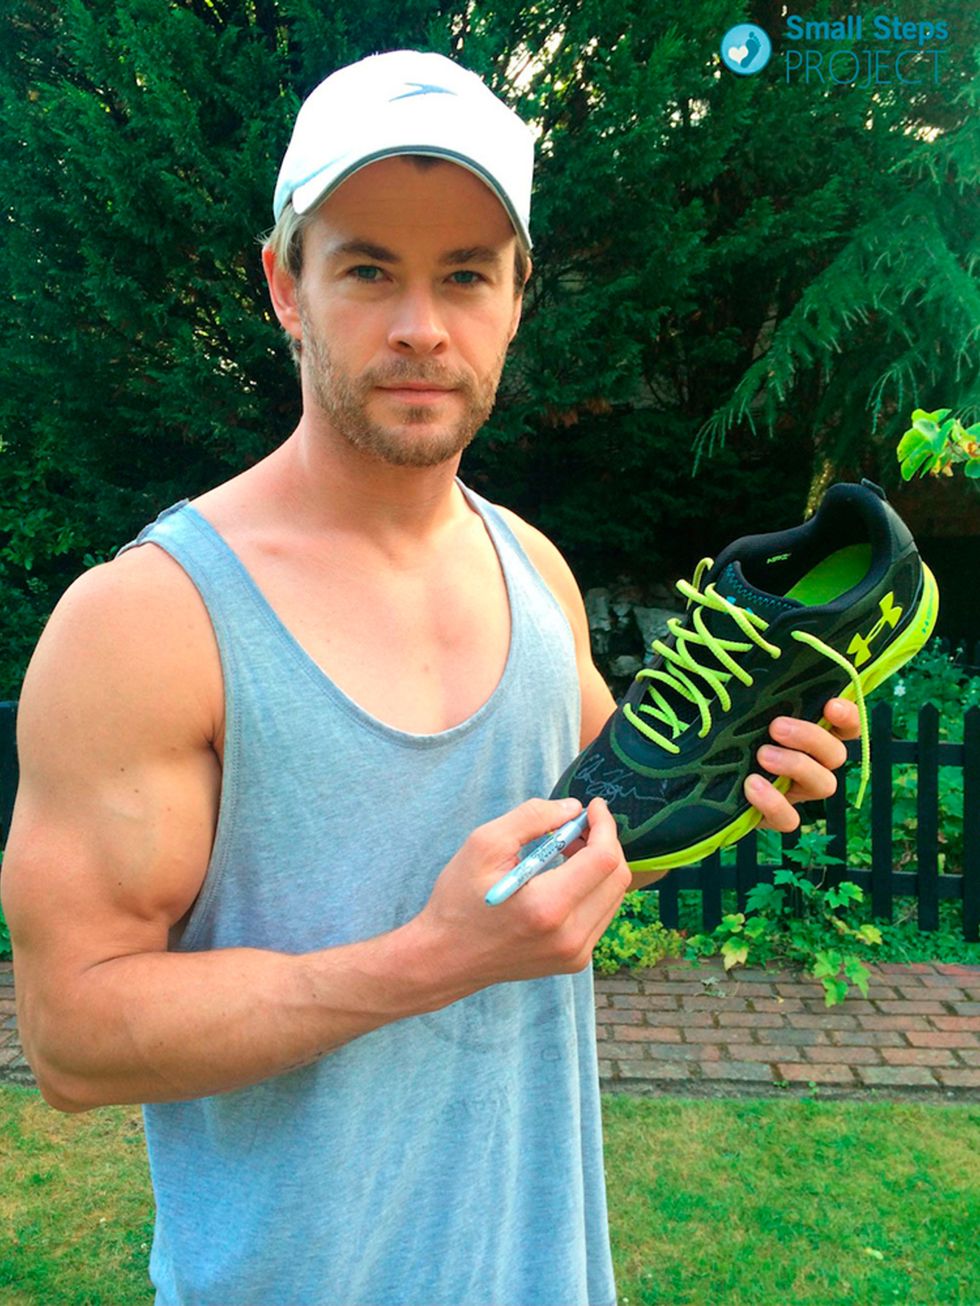 <p>Thor star <a href="http://www.smallstepsproject.org/portfolio/chris-hemsworth/">Chris Hemsworth</a> with his signed trainers.</p>